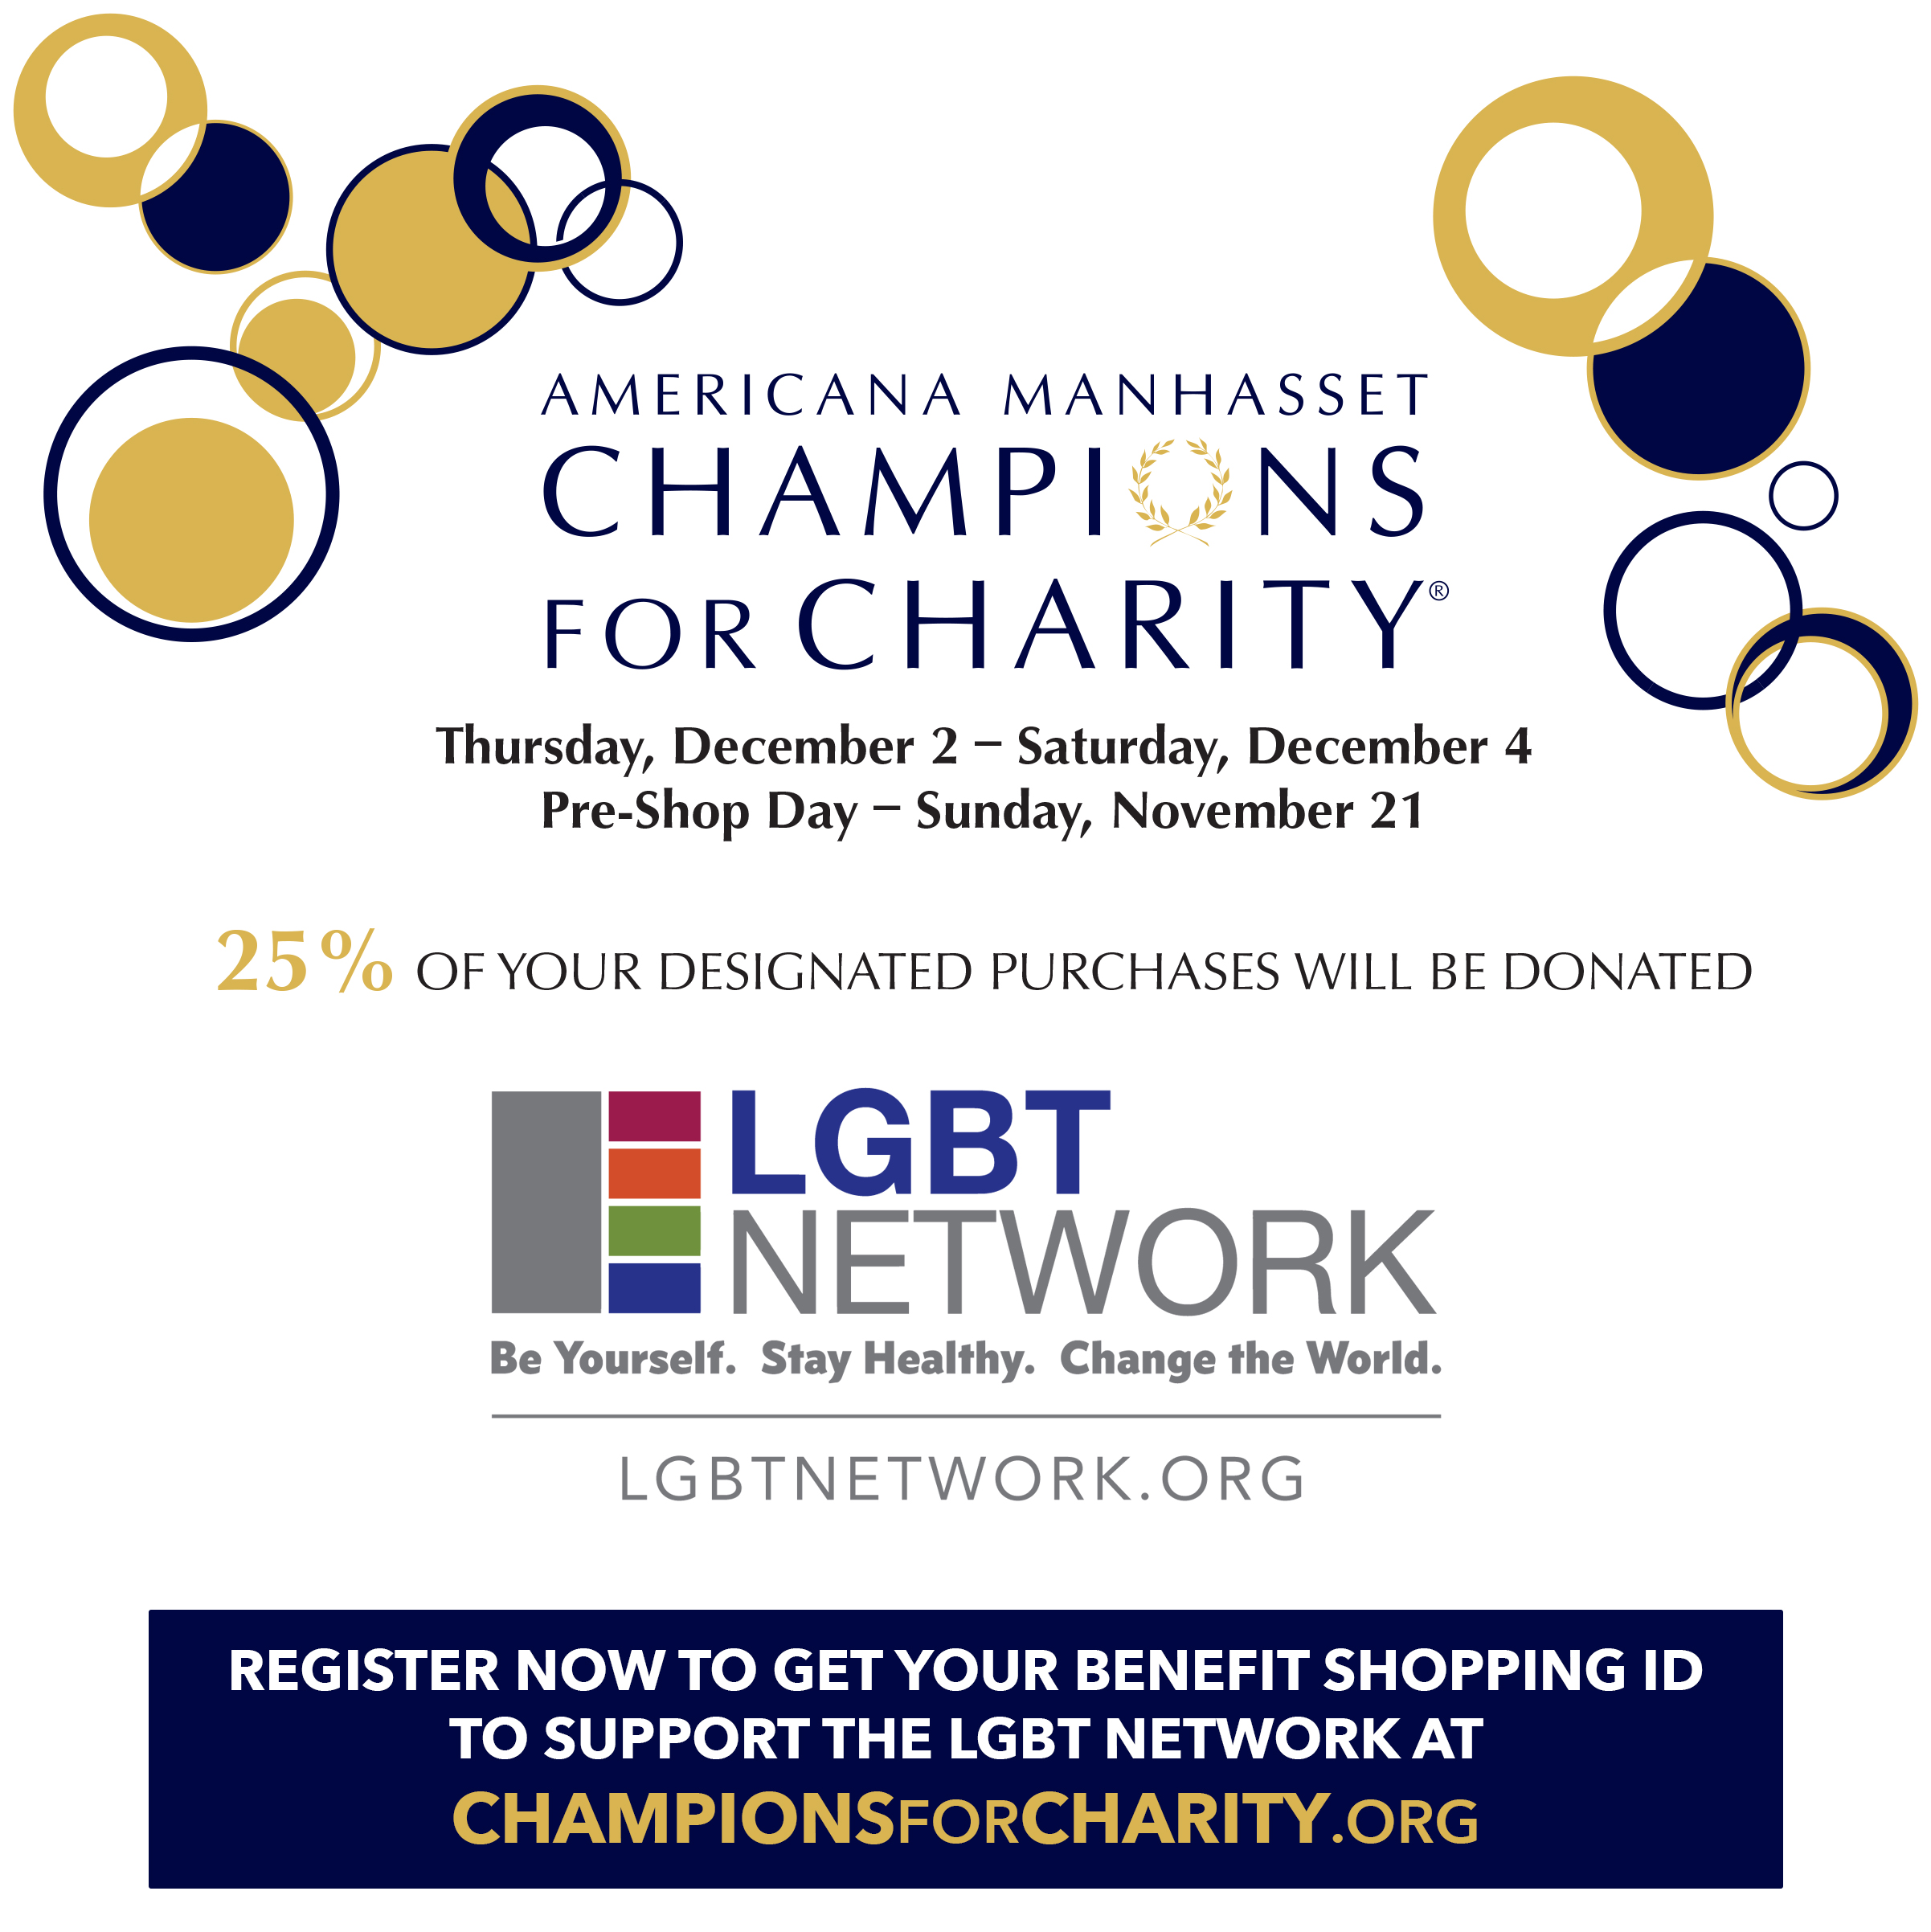 Brandmand Brandmand Sympatisere The LGBT Network on Twitter: "Americana Manhasset Champions for Charity®  holiday shopping benefit is 12/2 - 12/4. Help support @LGBTNetworkNY when  25% of your full-price, pre-tax purchases will be donated back to